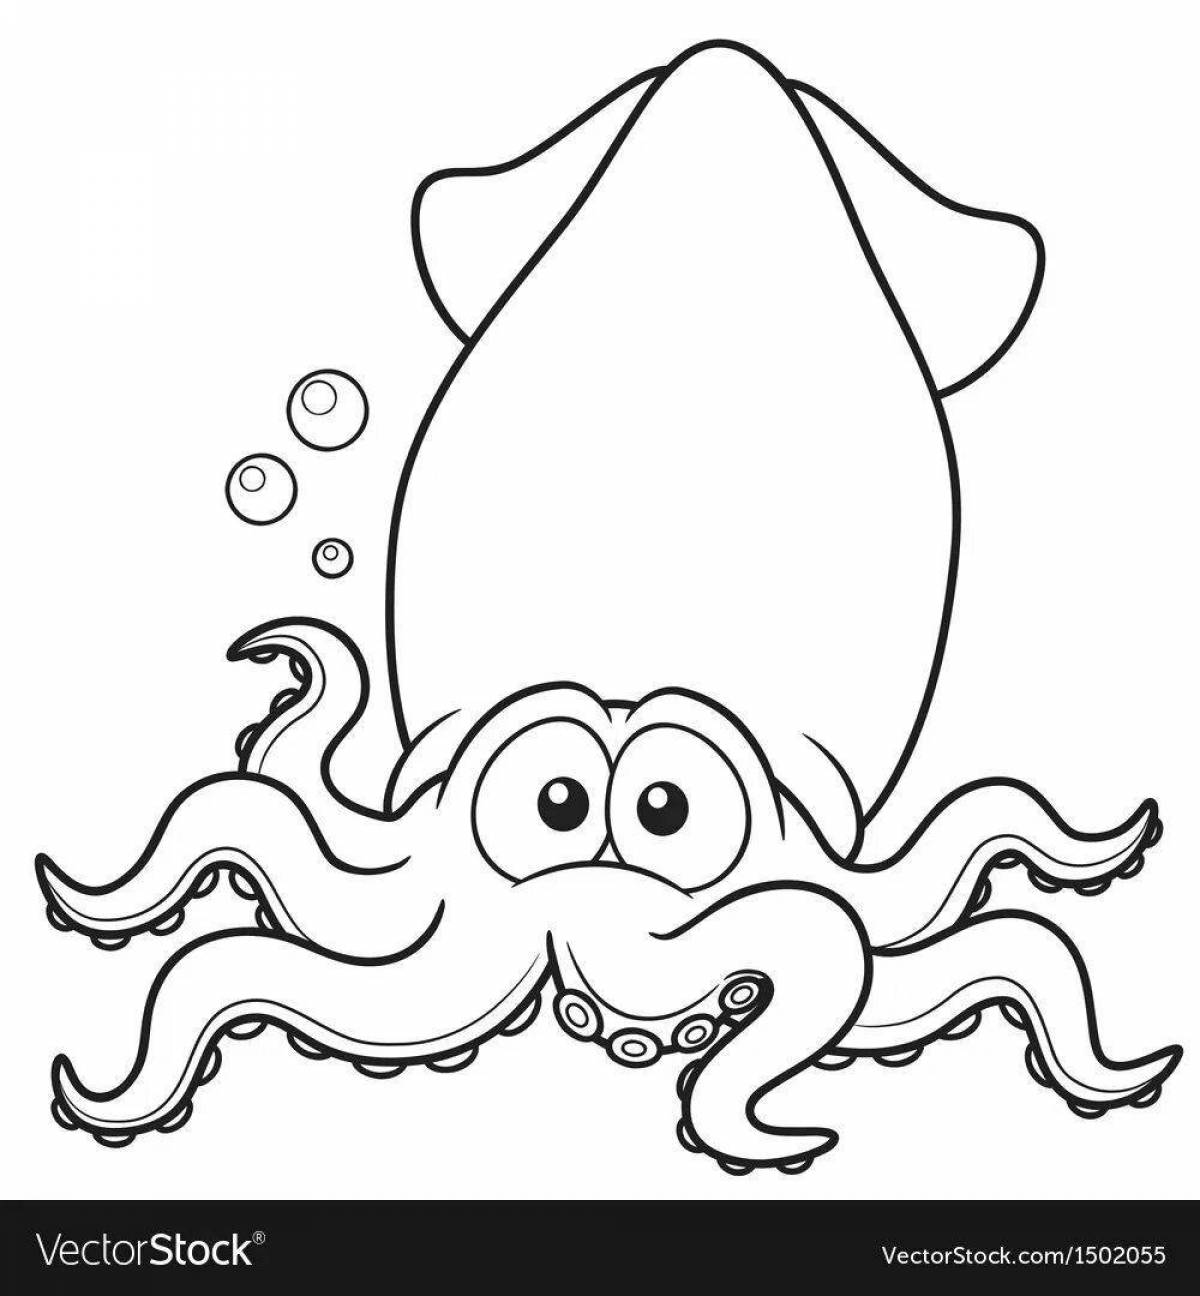 Fun squid coloring for kids